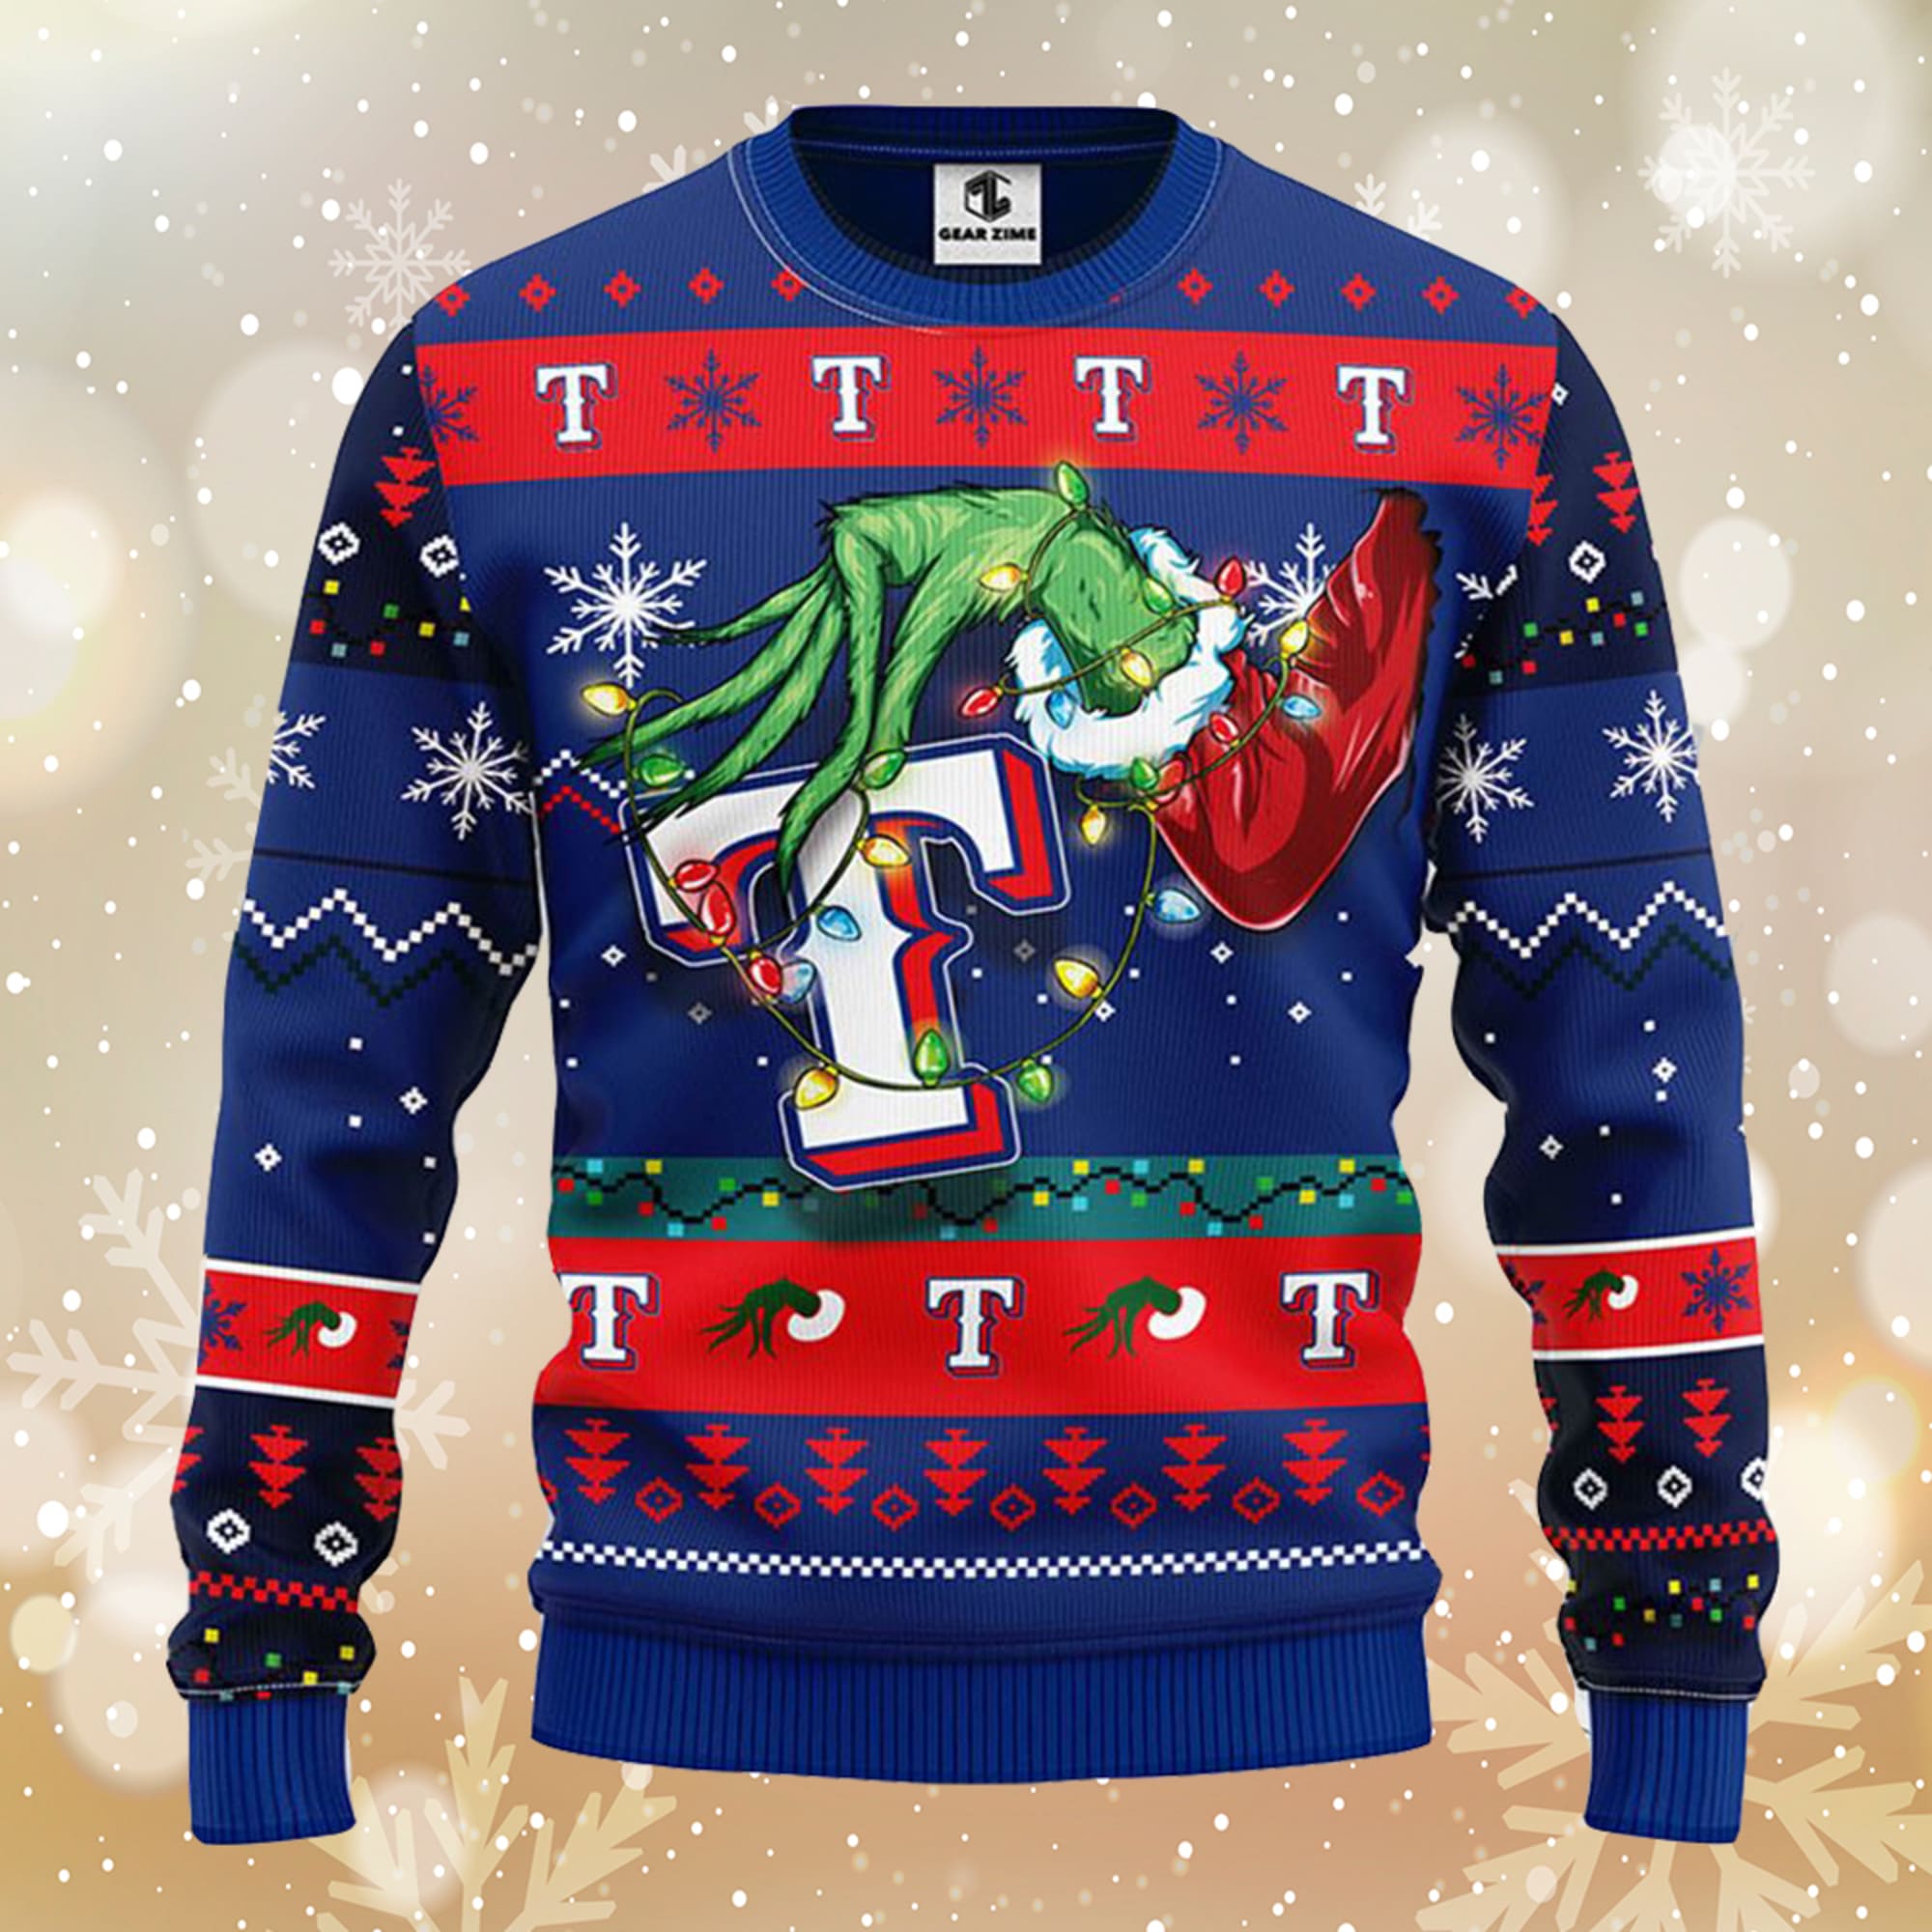 Texas Rangers Ugly Sweater - T-shirts Low Price